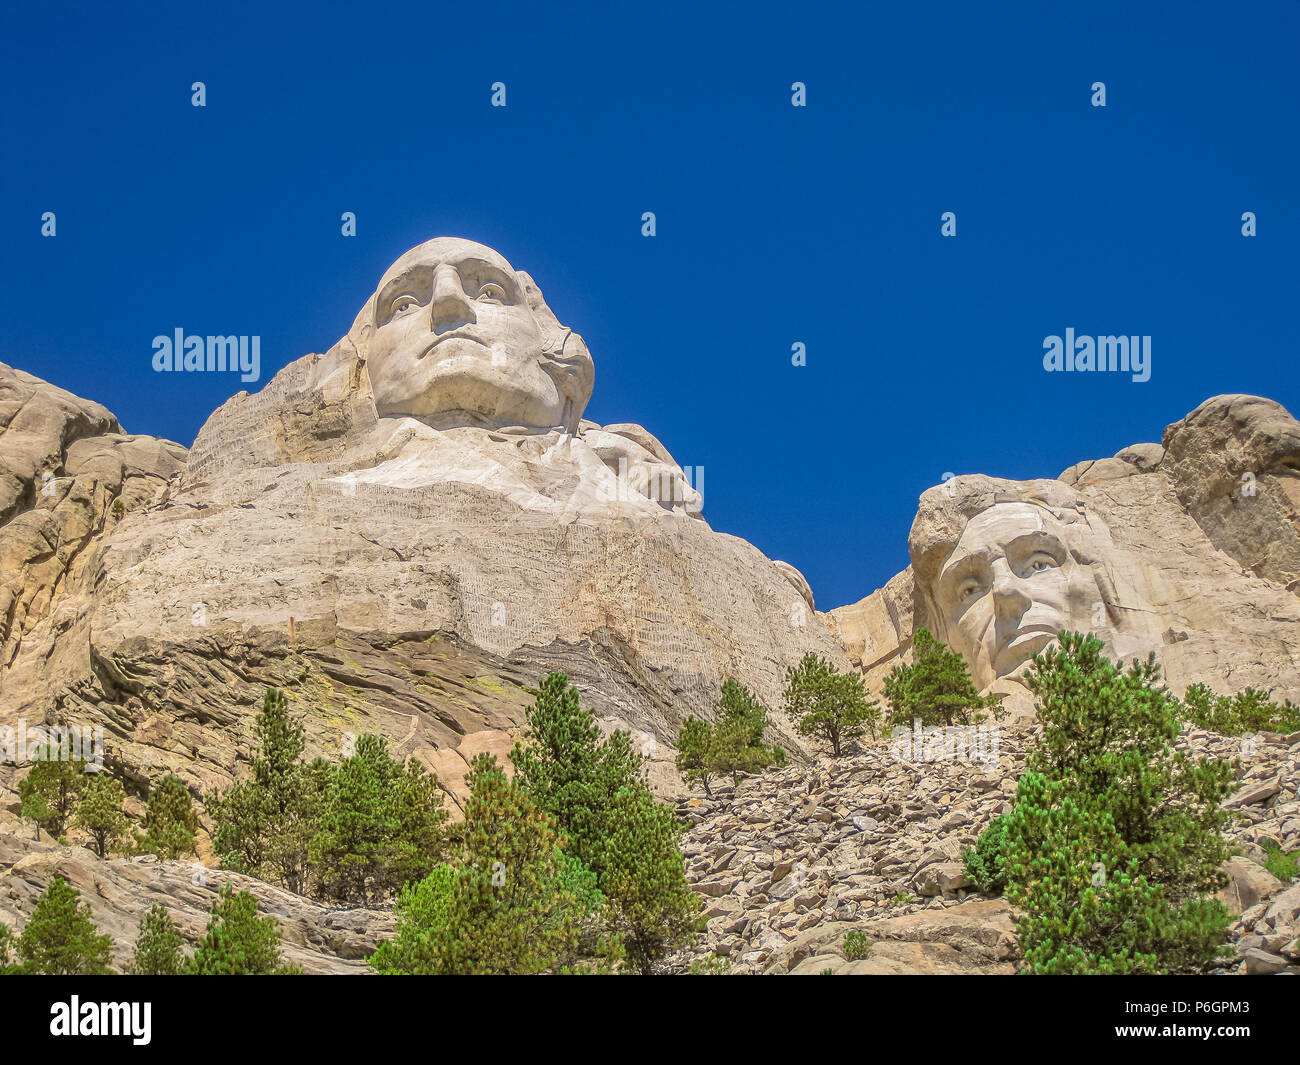 Mount Rushmore National Memorial of United States 4th july symbol of America and National Park in South Dakota. Presidents: George Washington, Thomas Jefferson, Theodore Roosevelt, Abraham Lincoln Stock Photo